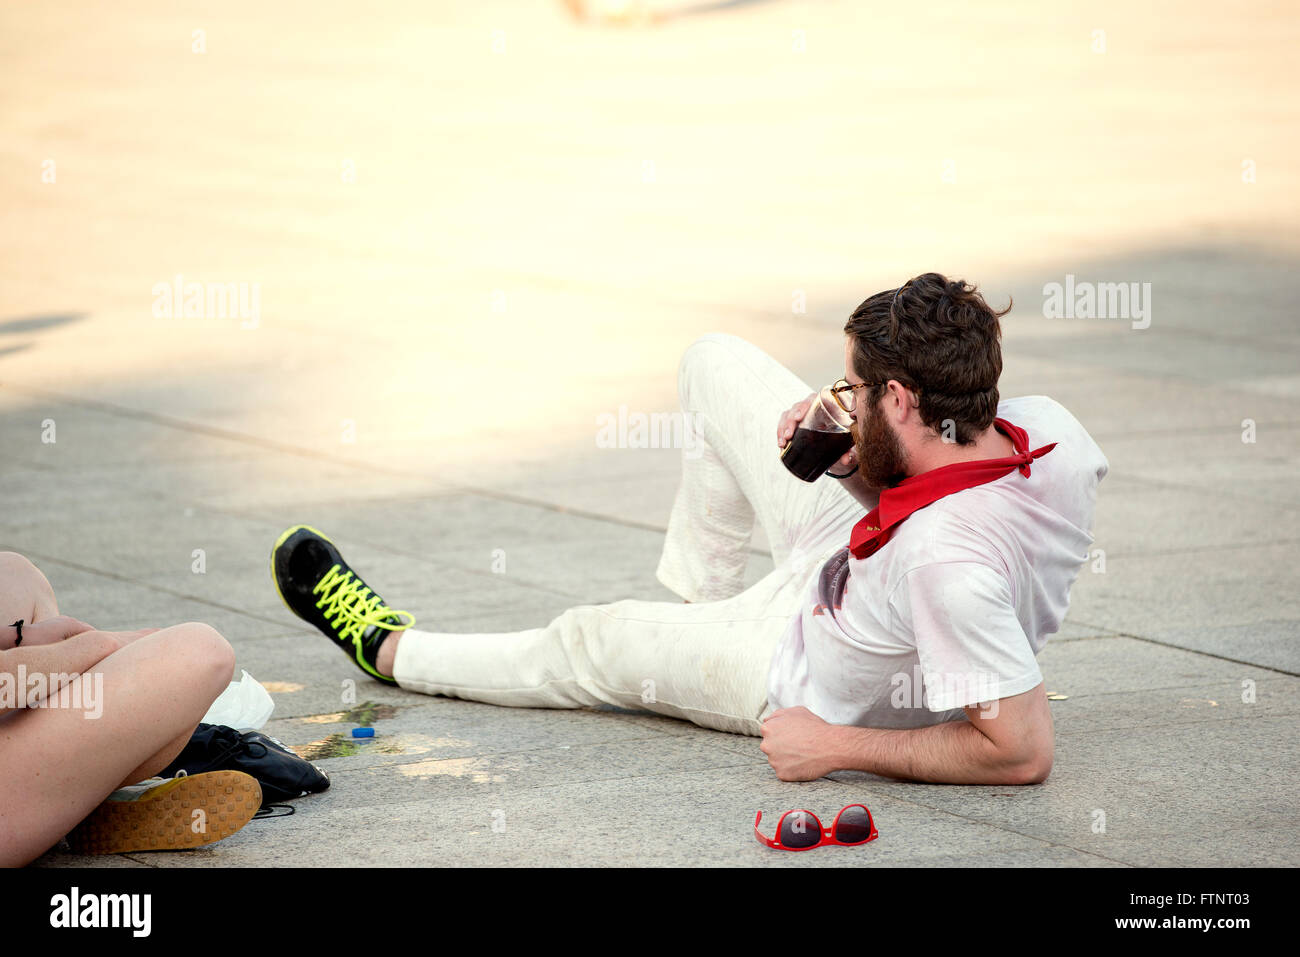 Spain Navarra Pamplona 10 July 2015 S Firmino fiesta a boy lying on the sidewalk during the festival, for s Firmino they consume Stock Photo